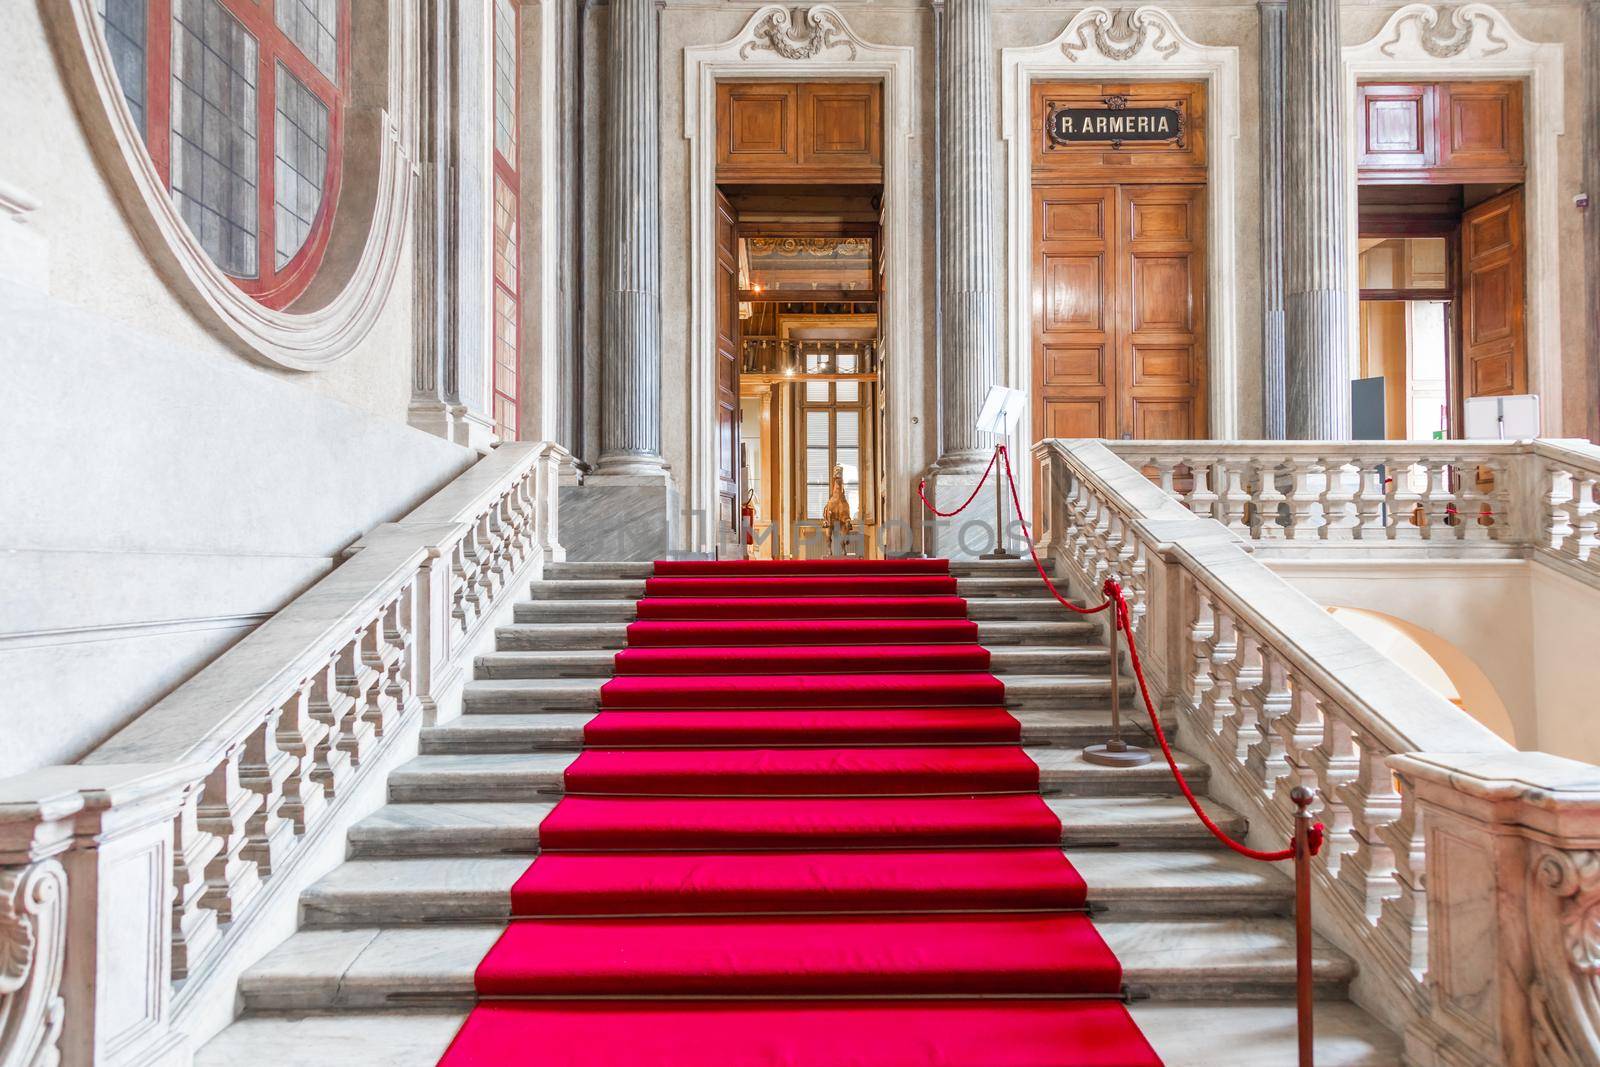 Turin, Italy - Circa January 2022: red carpet in Royal Palace - luxury elegant marble stairway.  by Perseomedusa